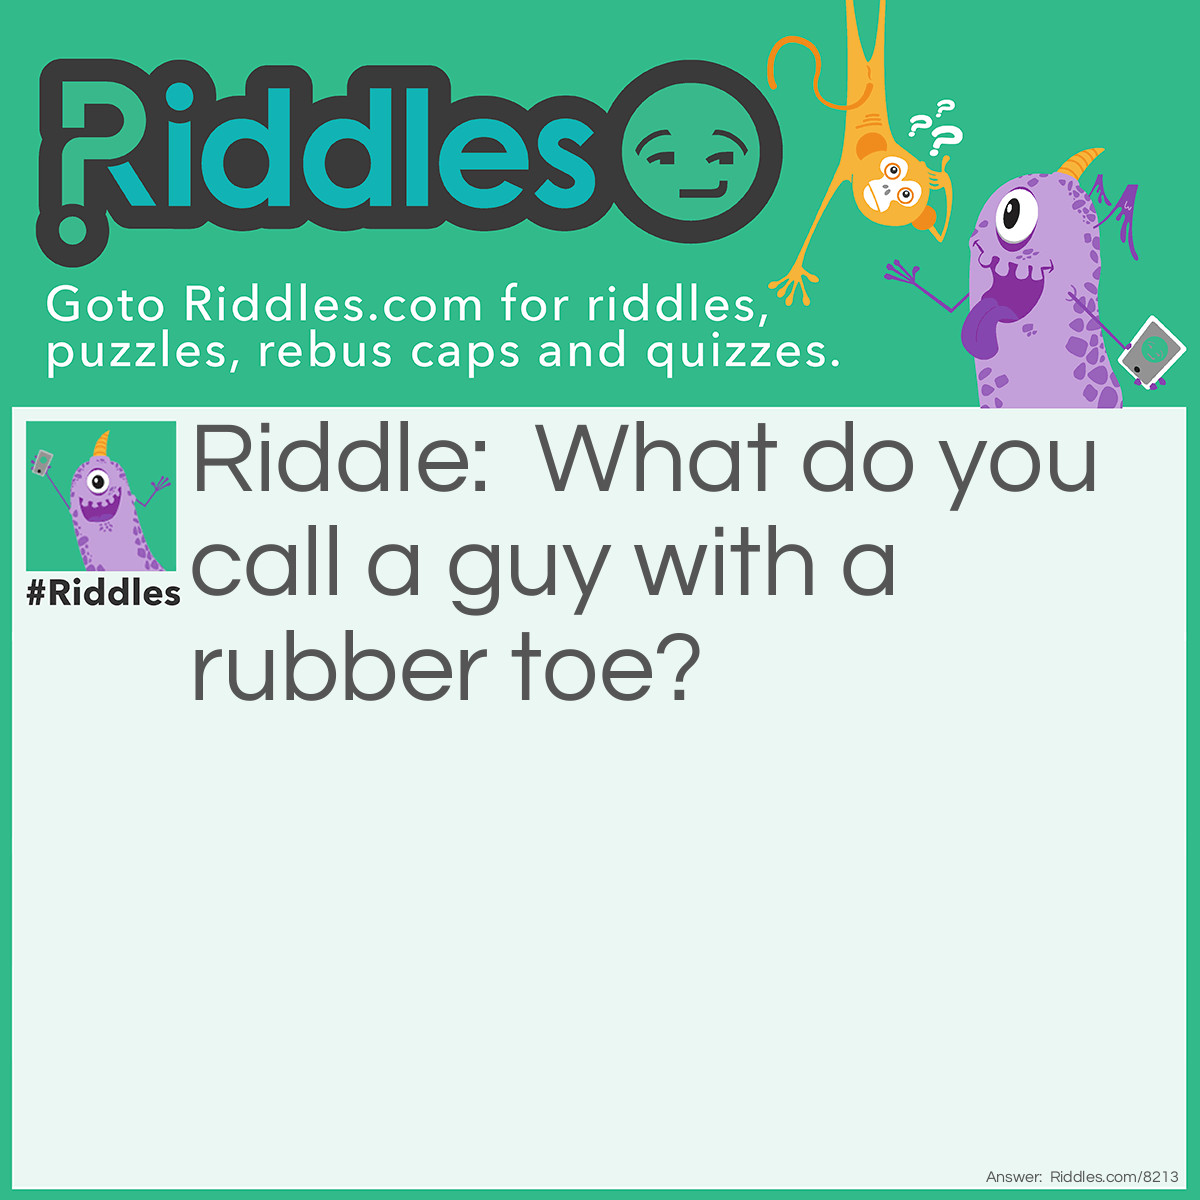 Riddle: What do you call a guy with a rubber toe? Answer: Roberto.